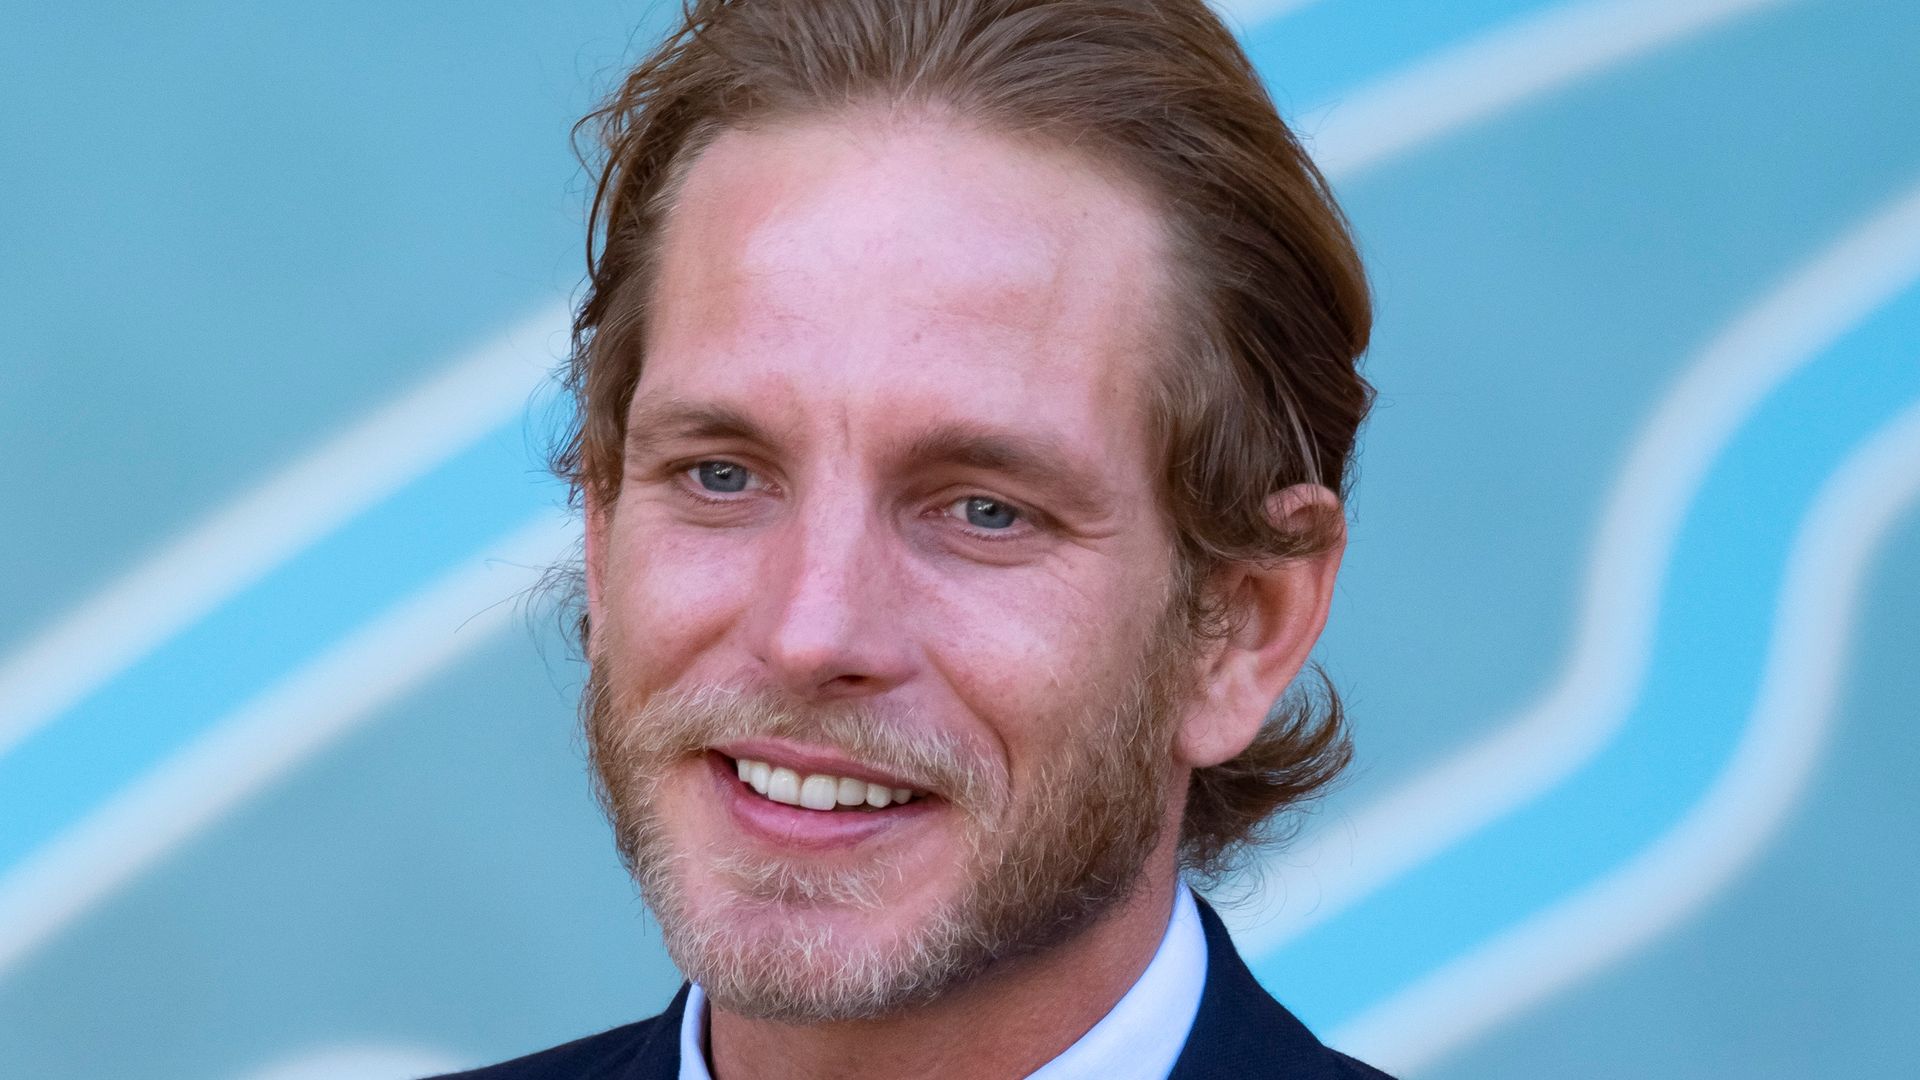  Andrea Casiraghi smiling in a close-up photo